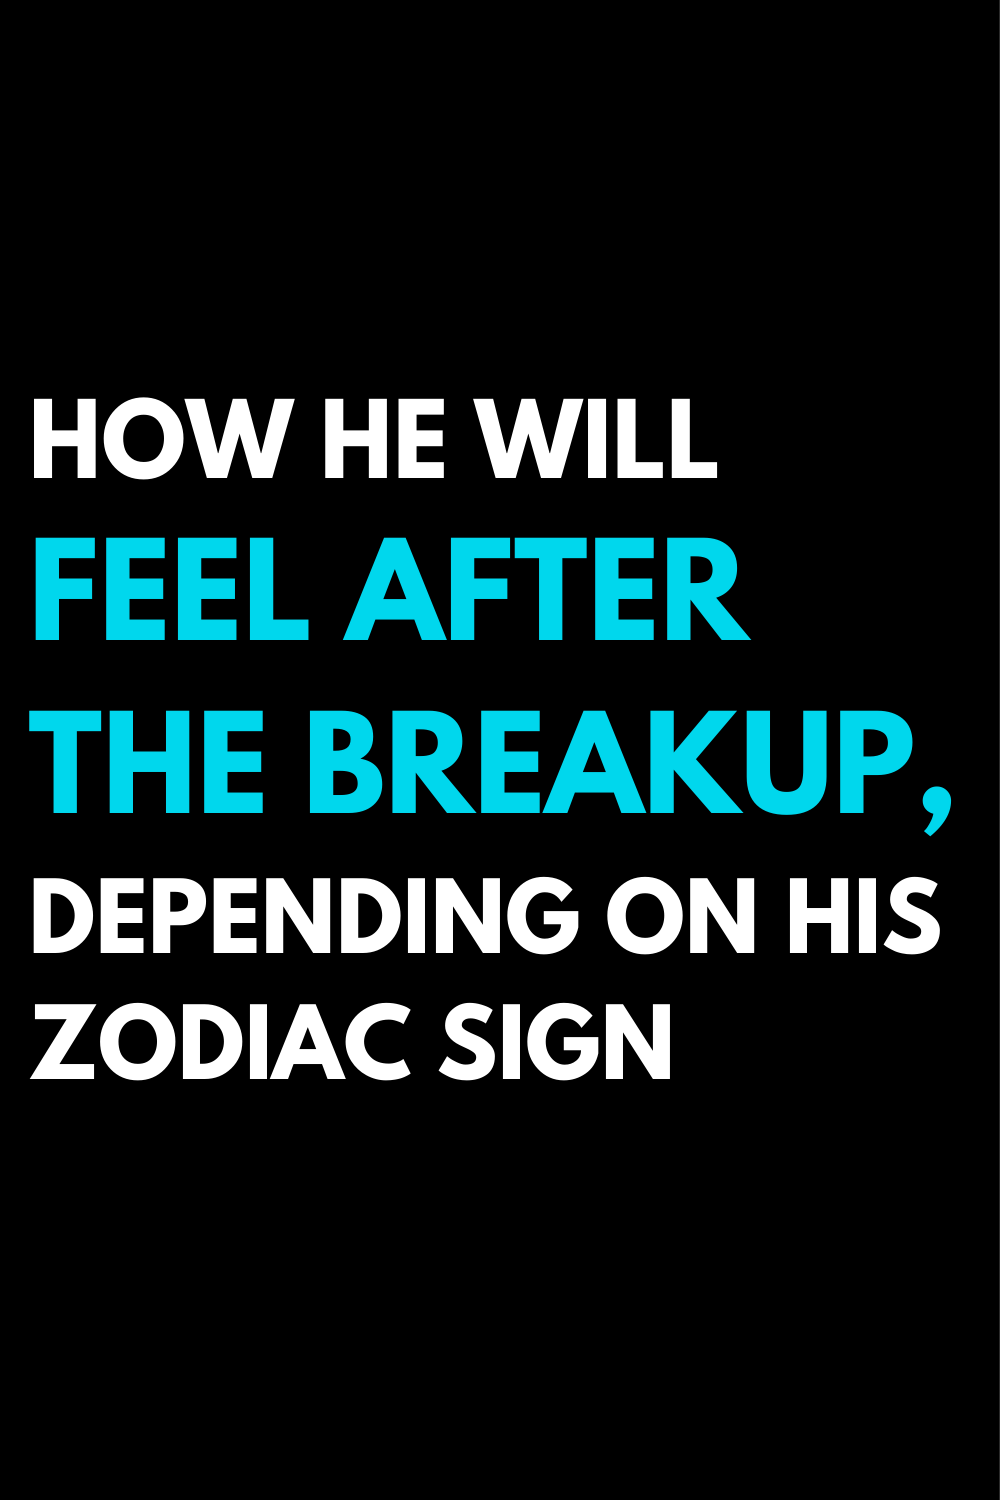 How he will feel after the breakup, depending on his zodiac sign